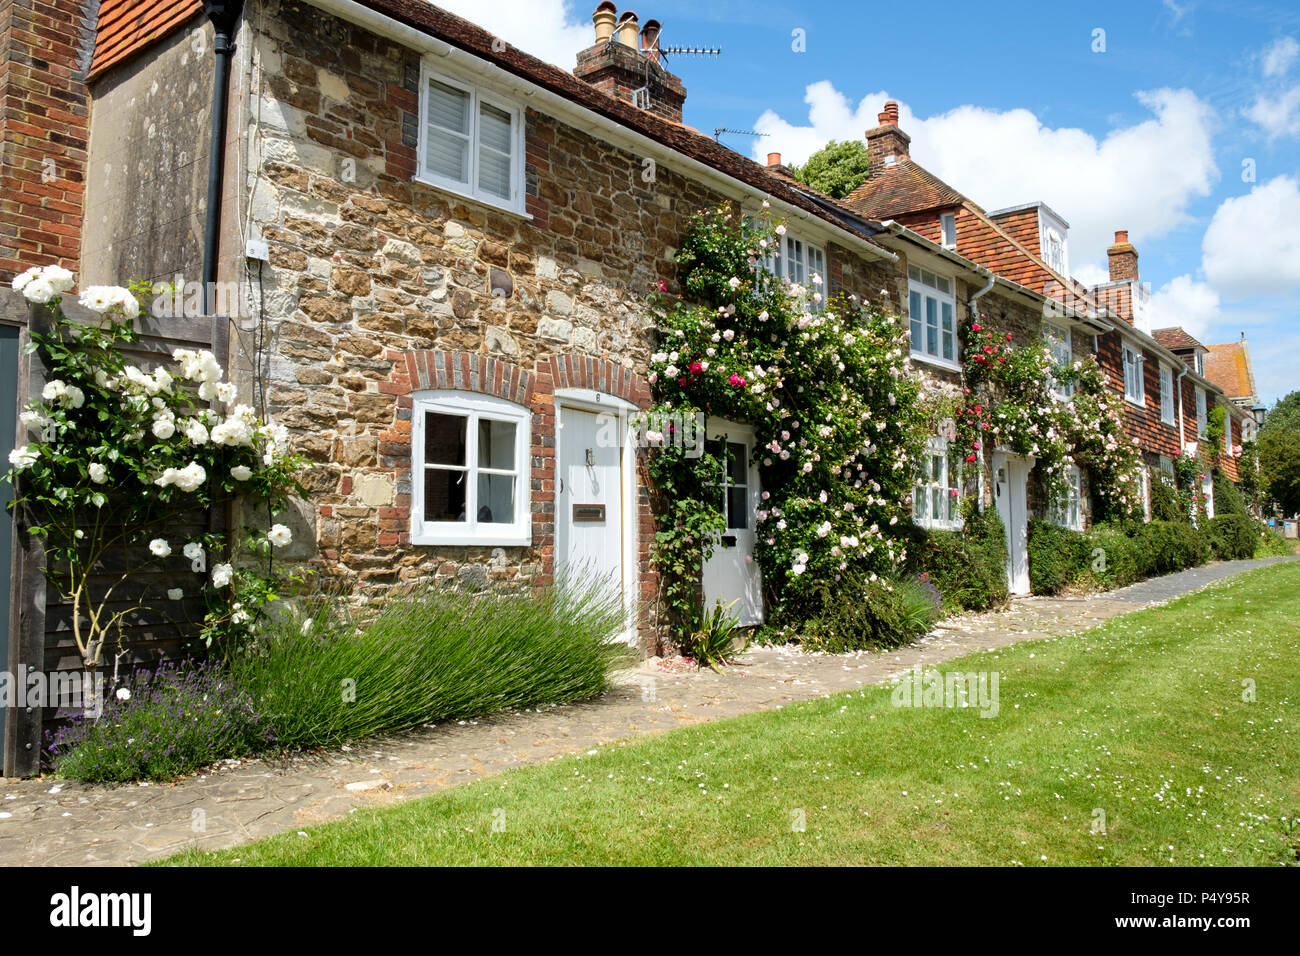 Pretty rose covered cottages in the picturesque village of Winchelsea, East Sussex, UK Stock Photo